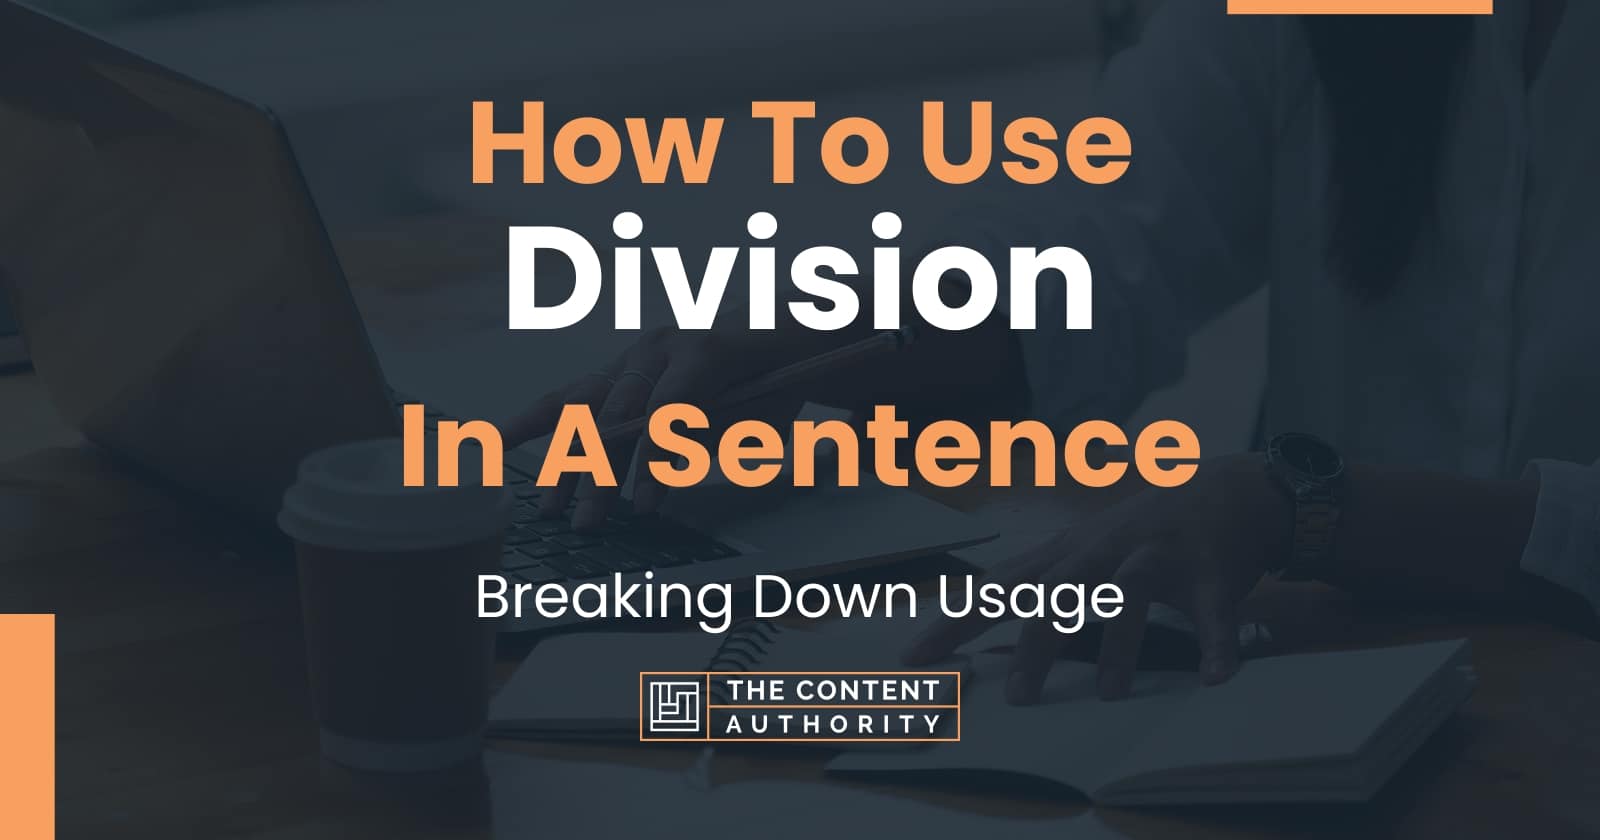 how-to-use-division-in-a-sentence-breaking-down-usage